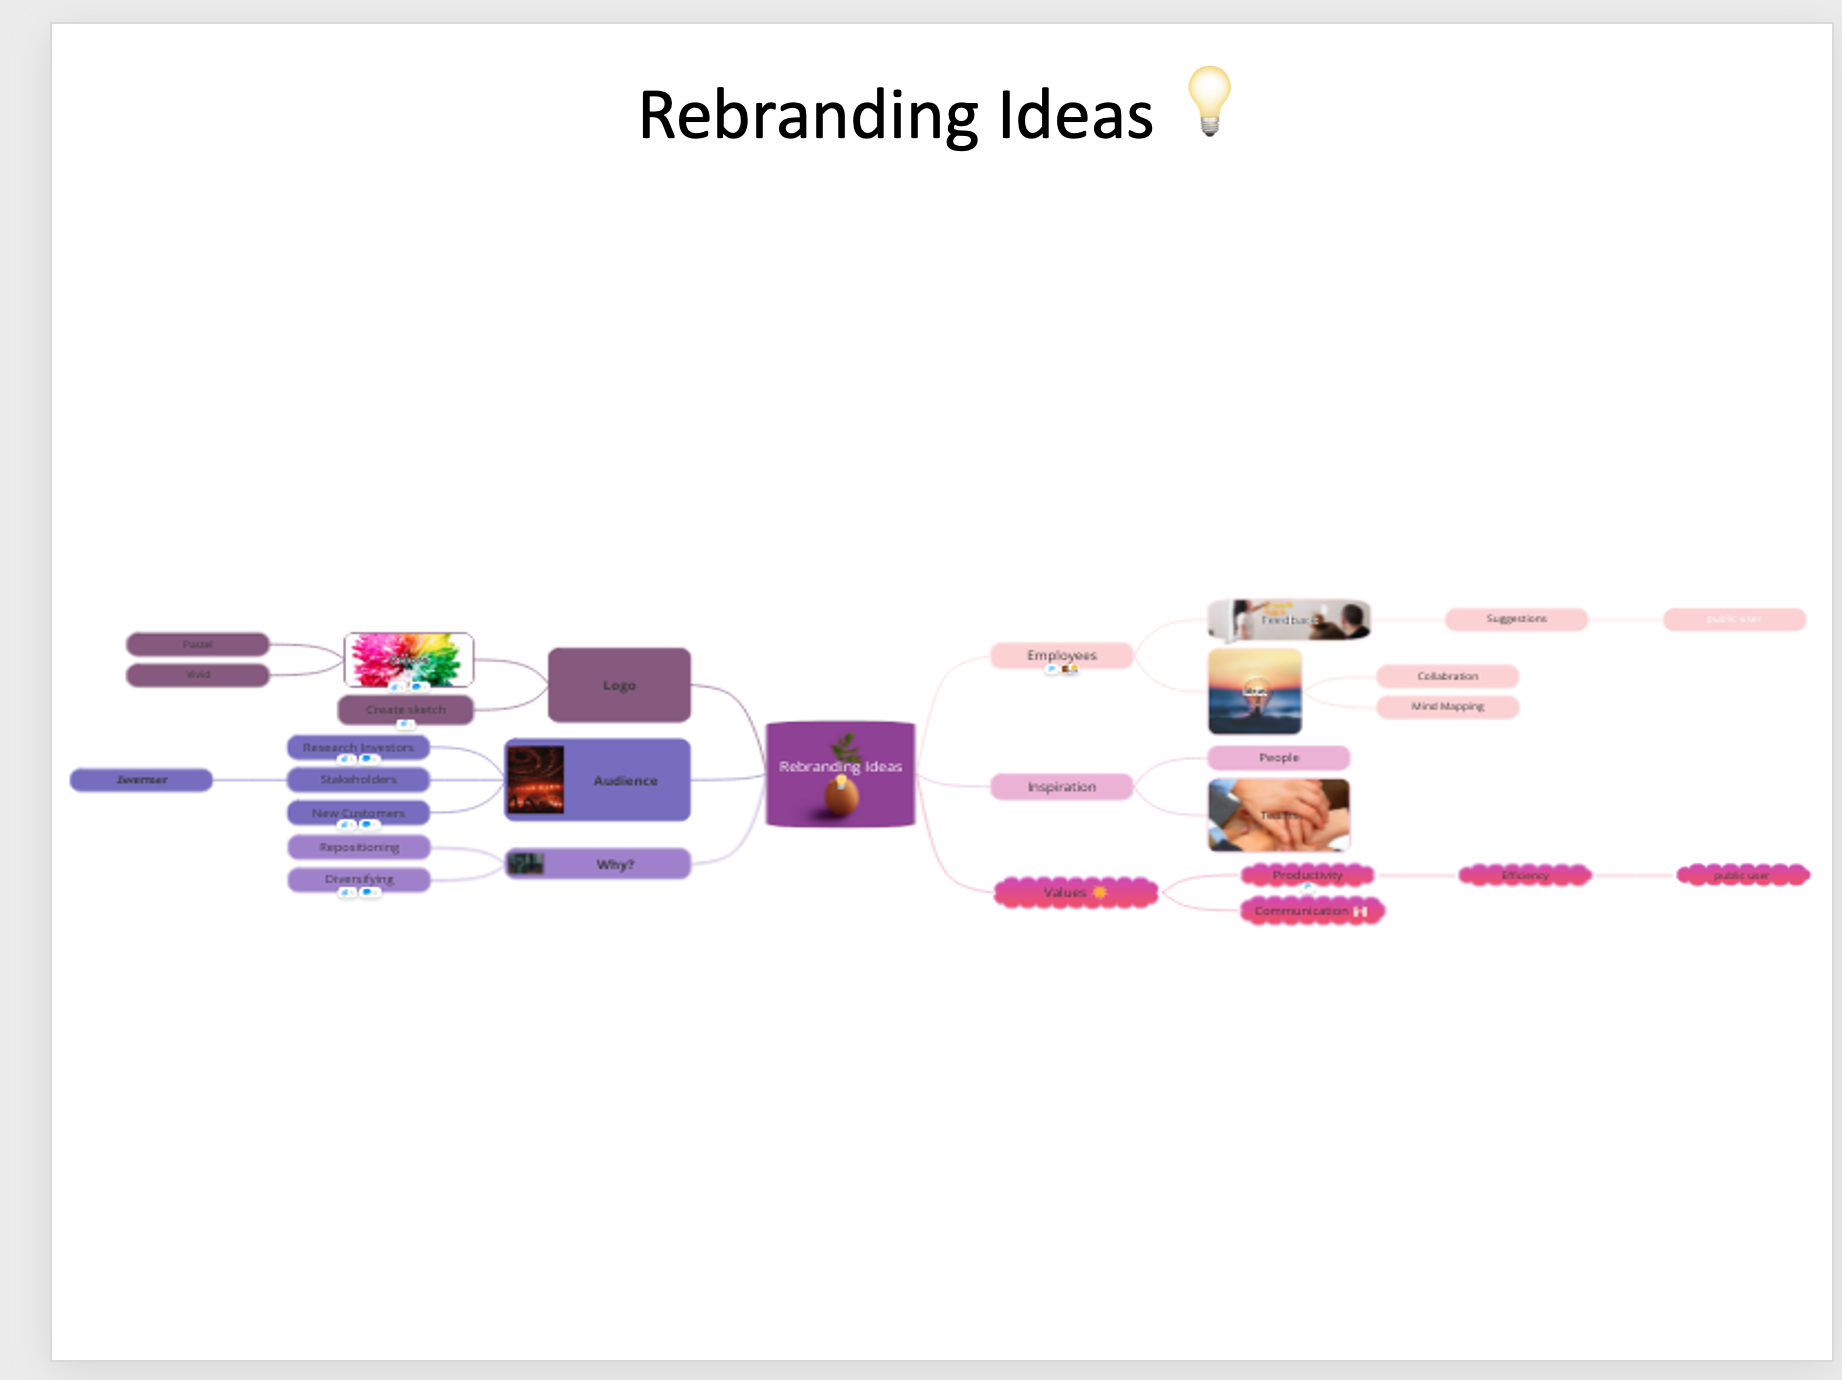 Mind map image on the first page.